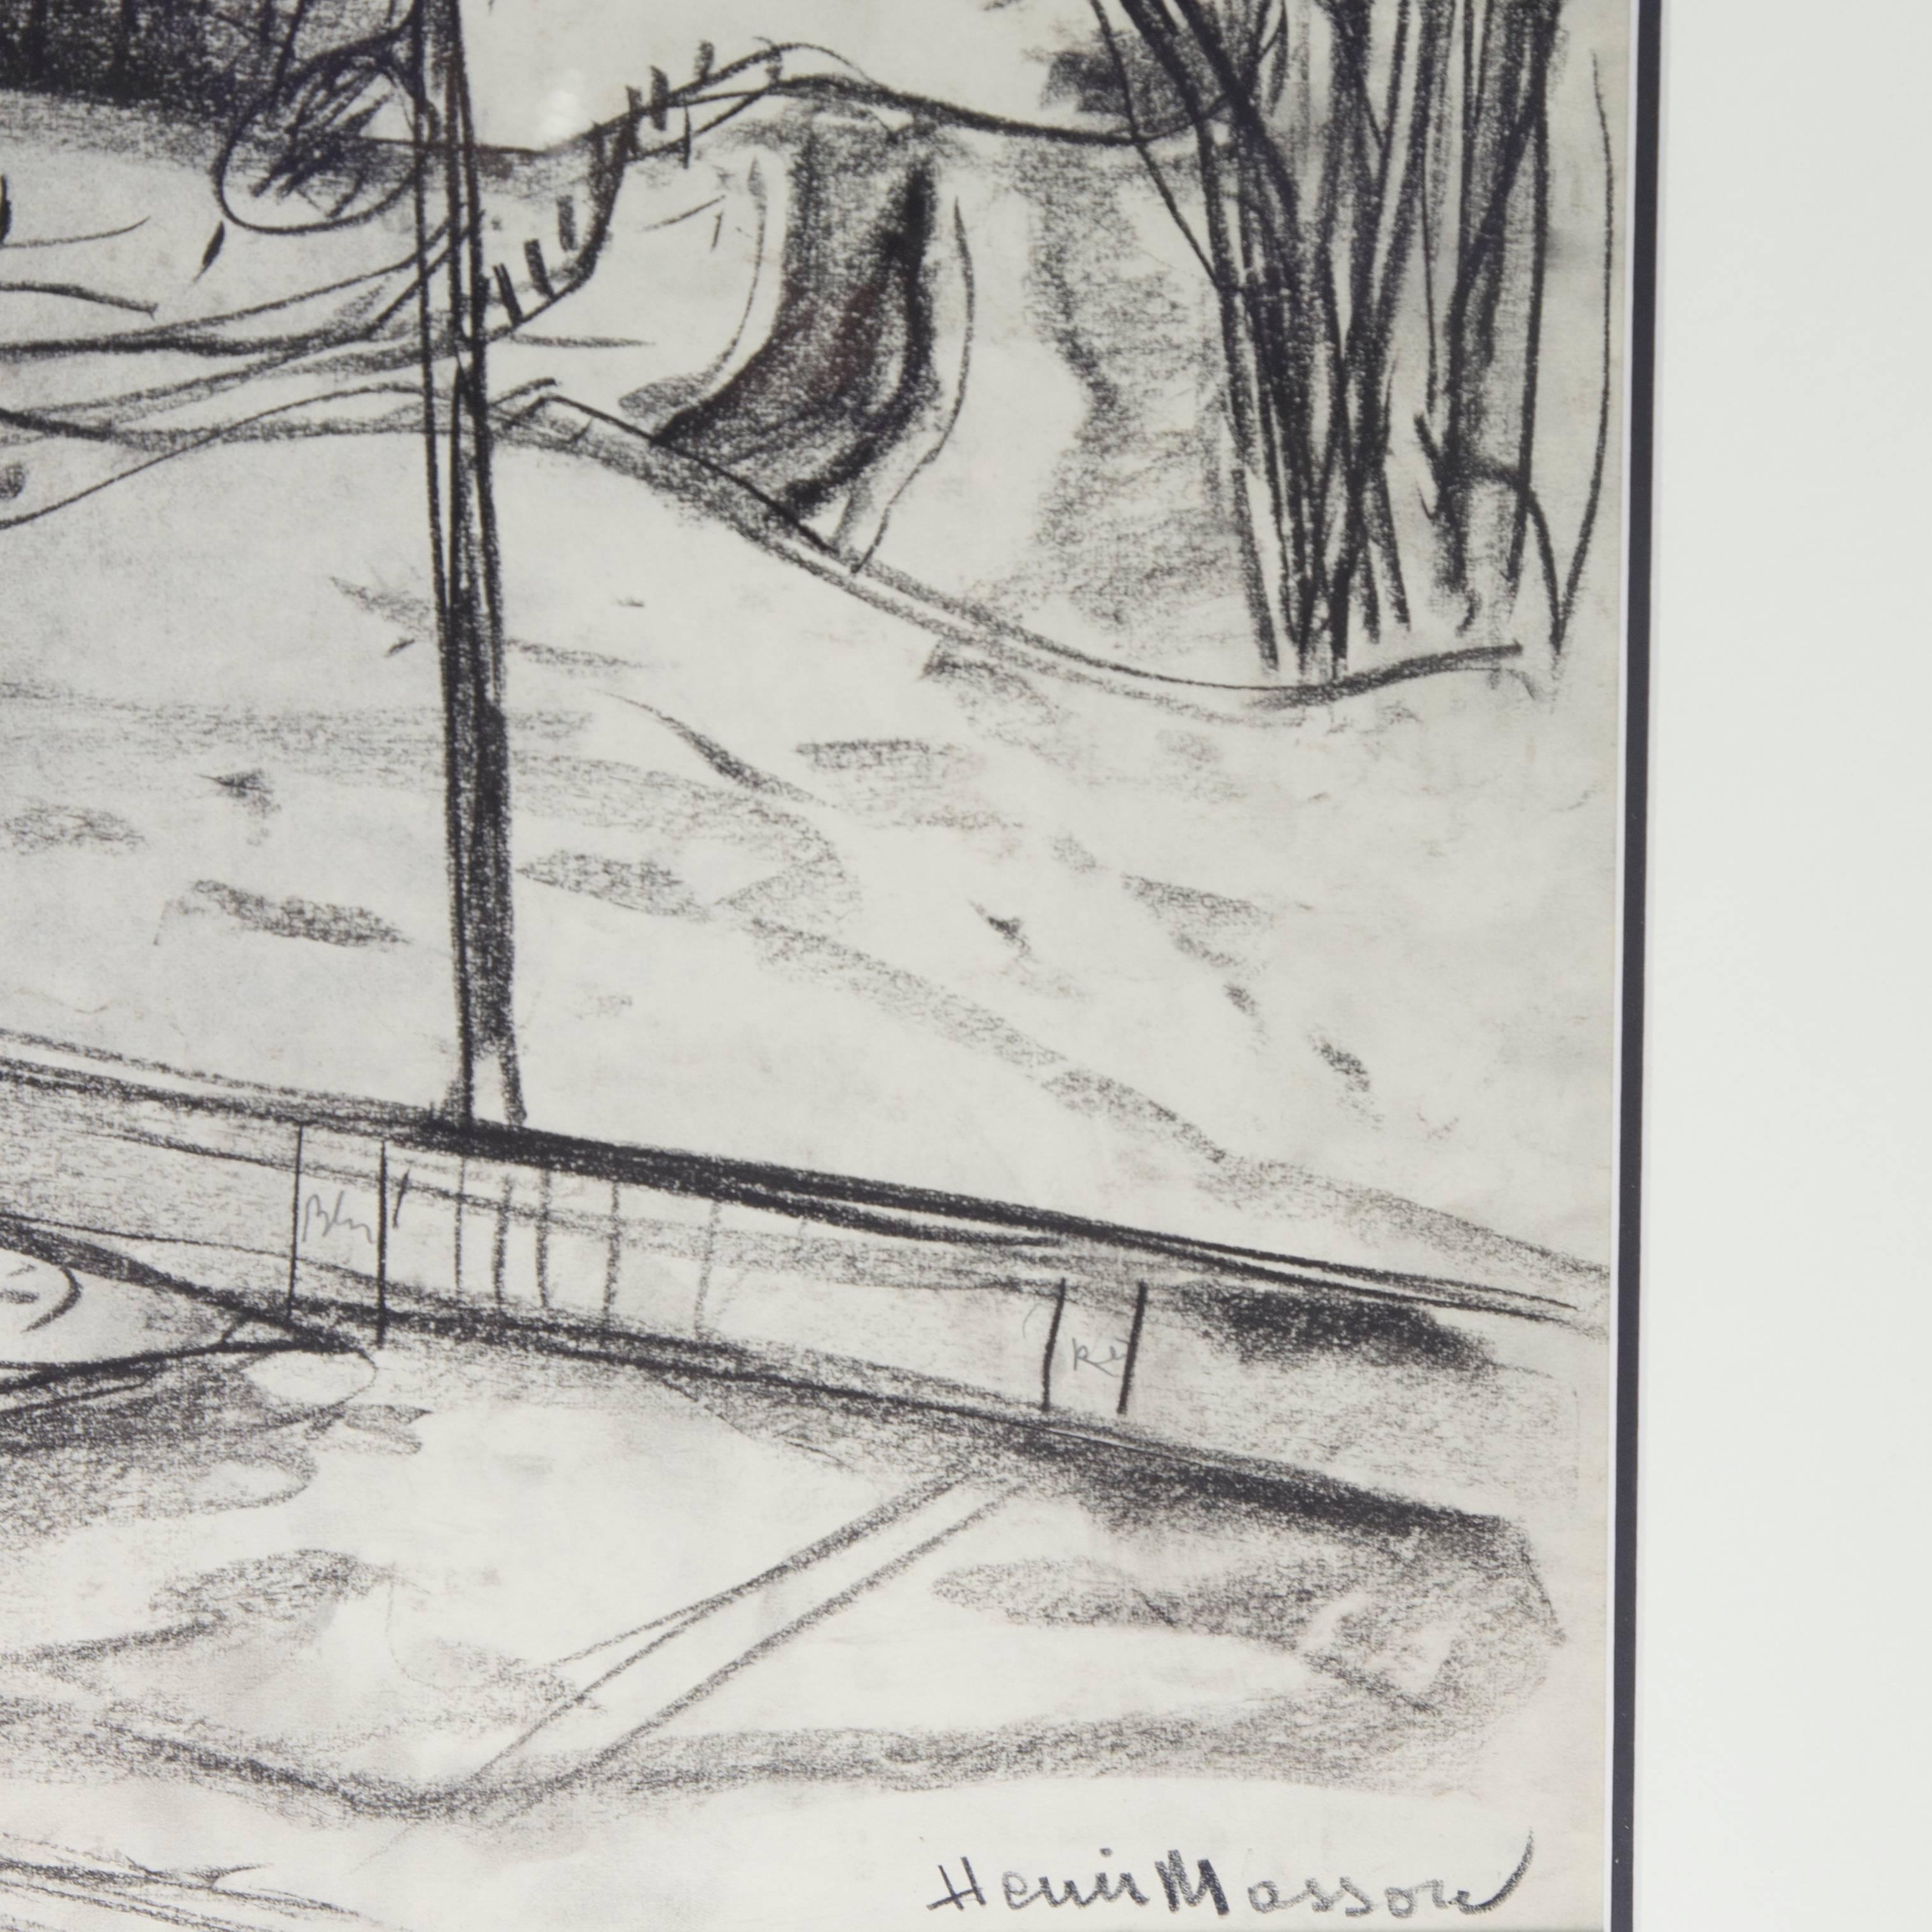 Charcoal Landscape by Henri Leopold Masson (1907-1996) unframed size: 18.5” x 24”; framed size: 27.5” x 32.5”
Henri Léopold Masson, painter (b at Spy, Belgium 10 Jan 1907; d at Ottawa 9 Feb 1996). Largely self-taught, Masson combined his narrative